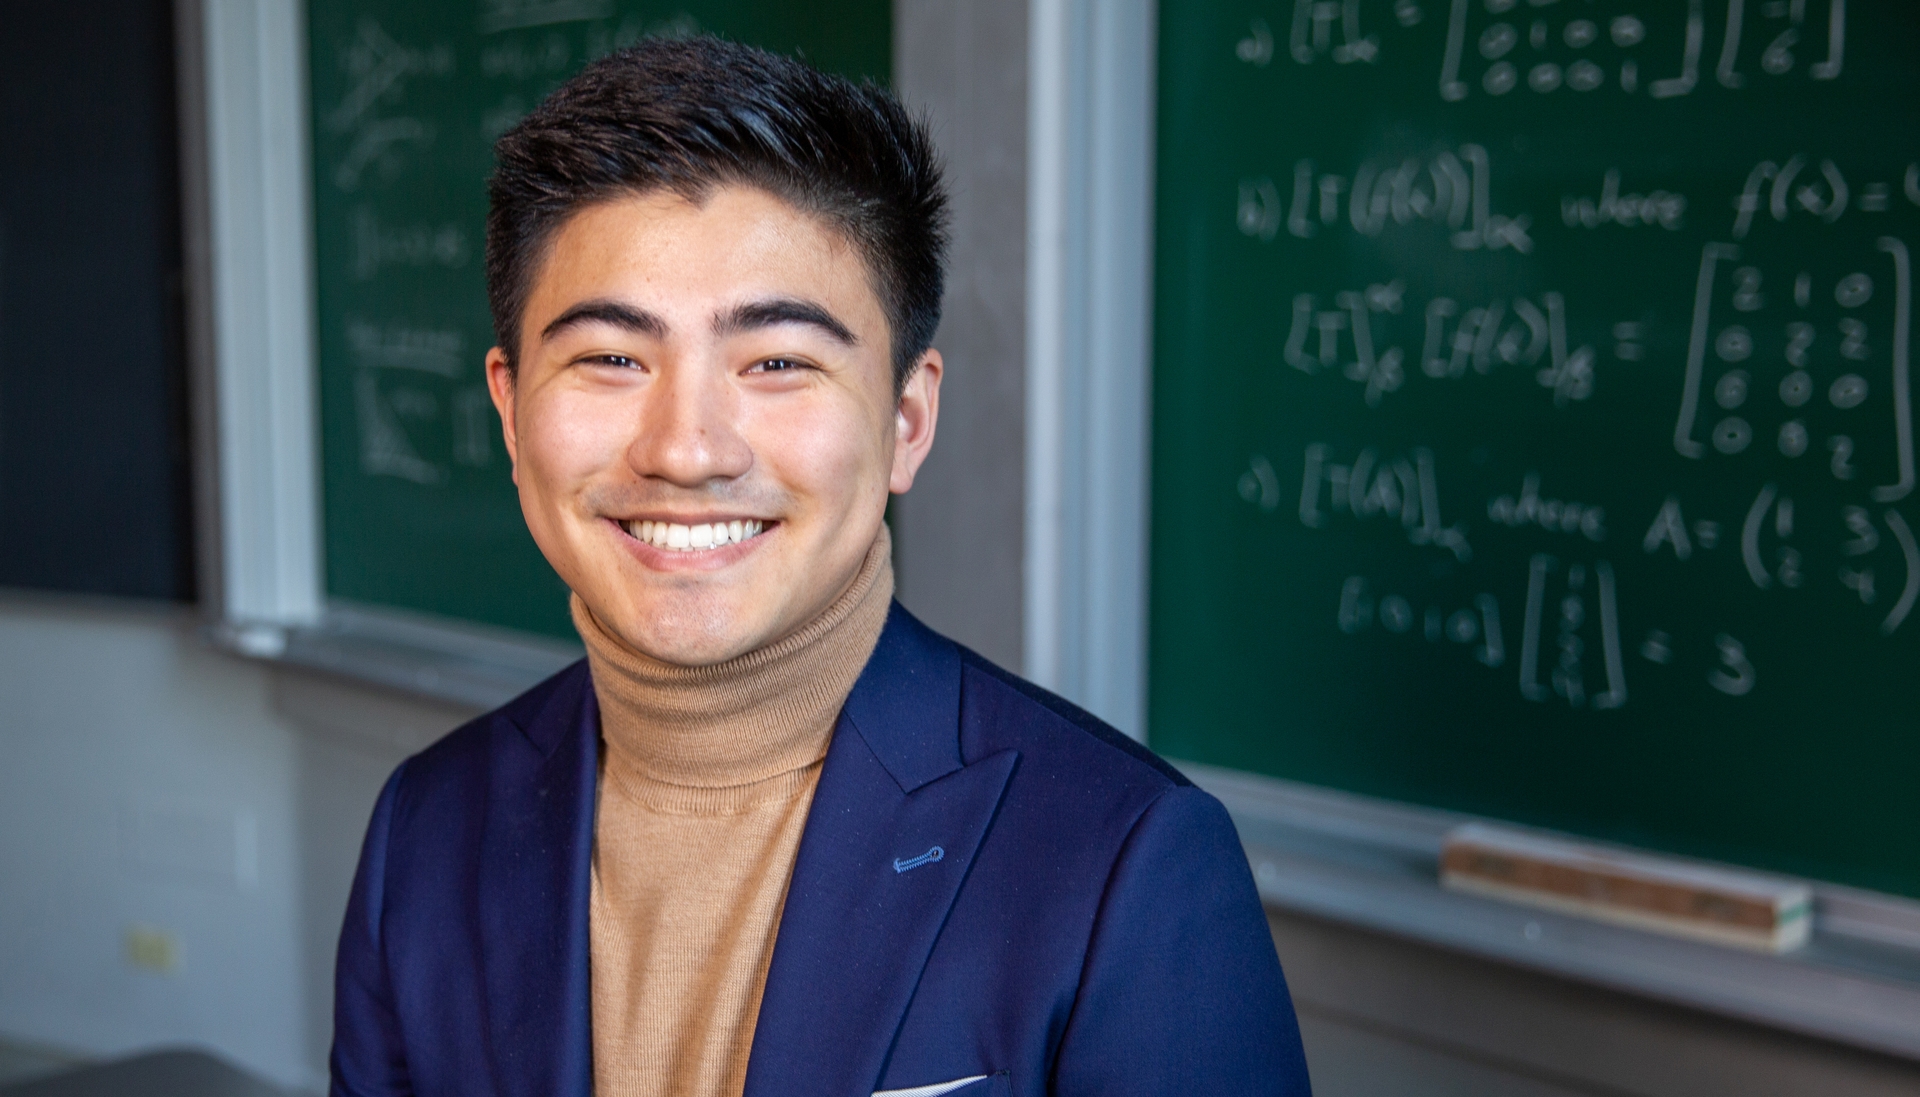 smiling young man in turtelneck and jacket standing in front of a chalkboard with math equations